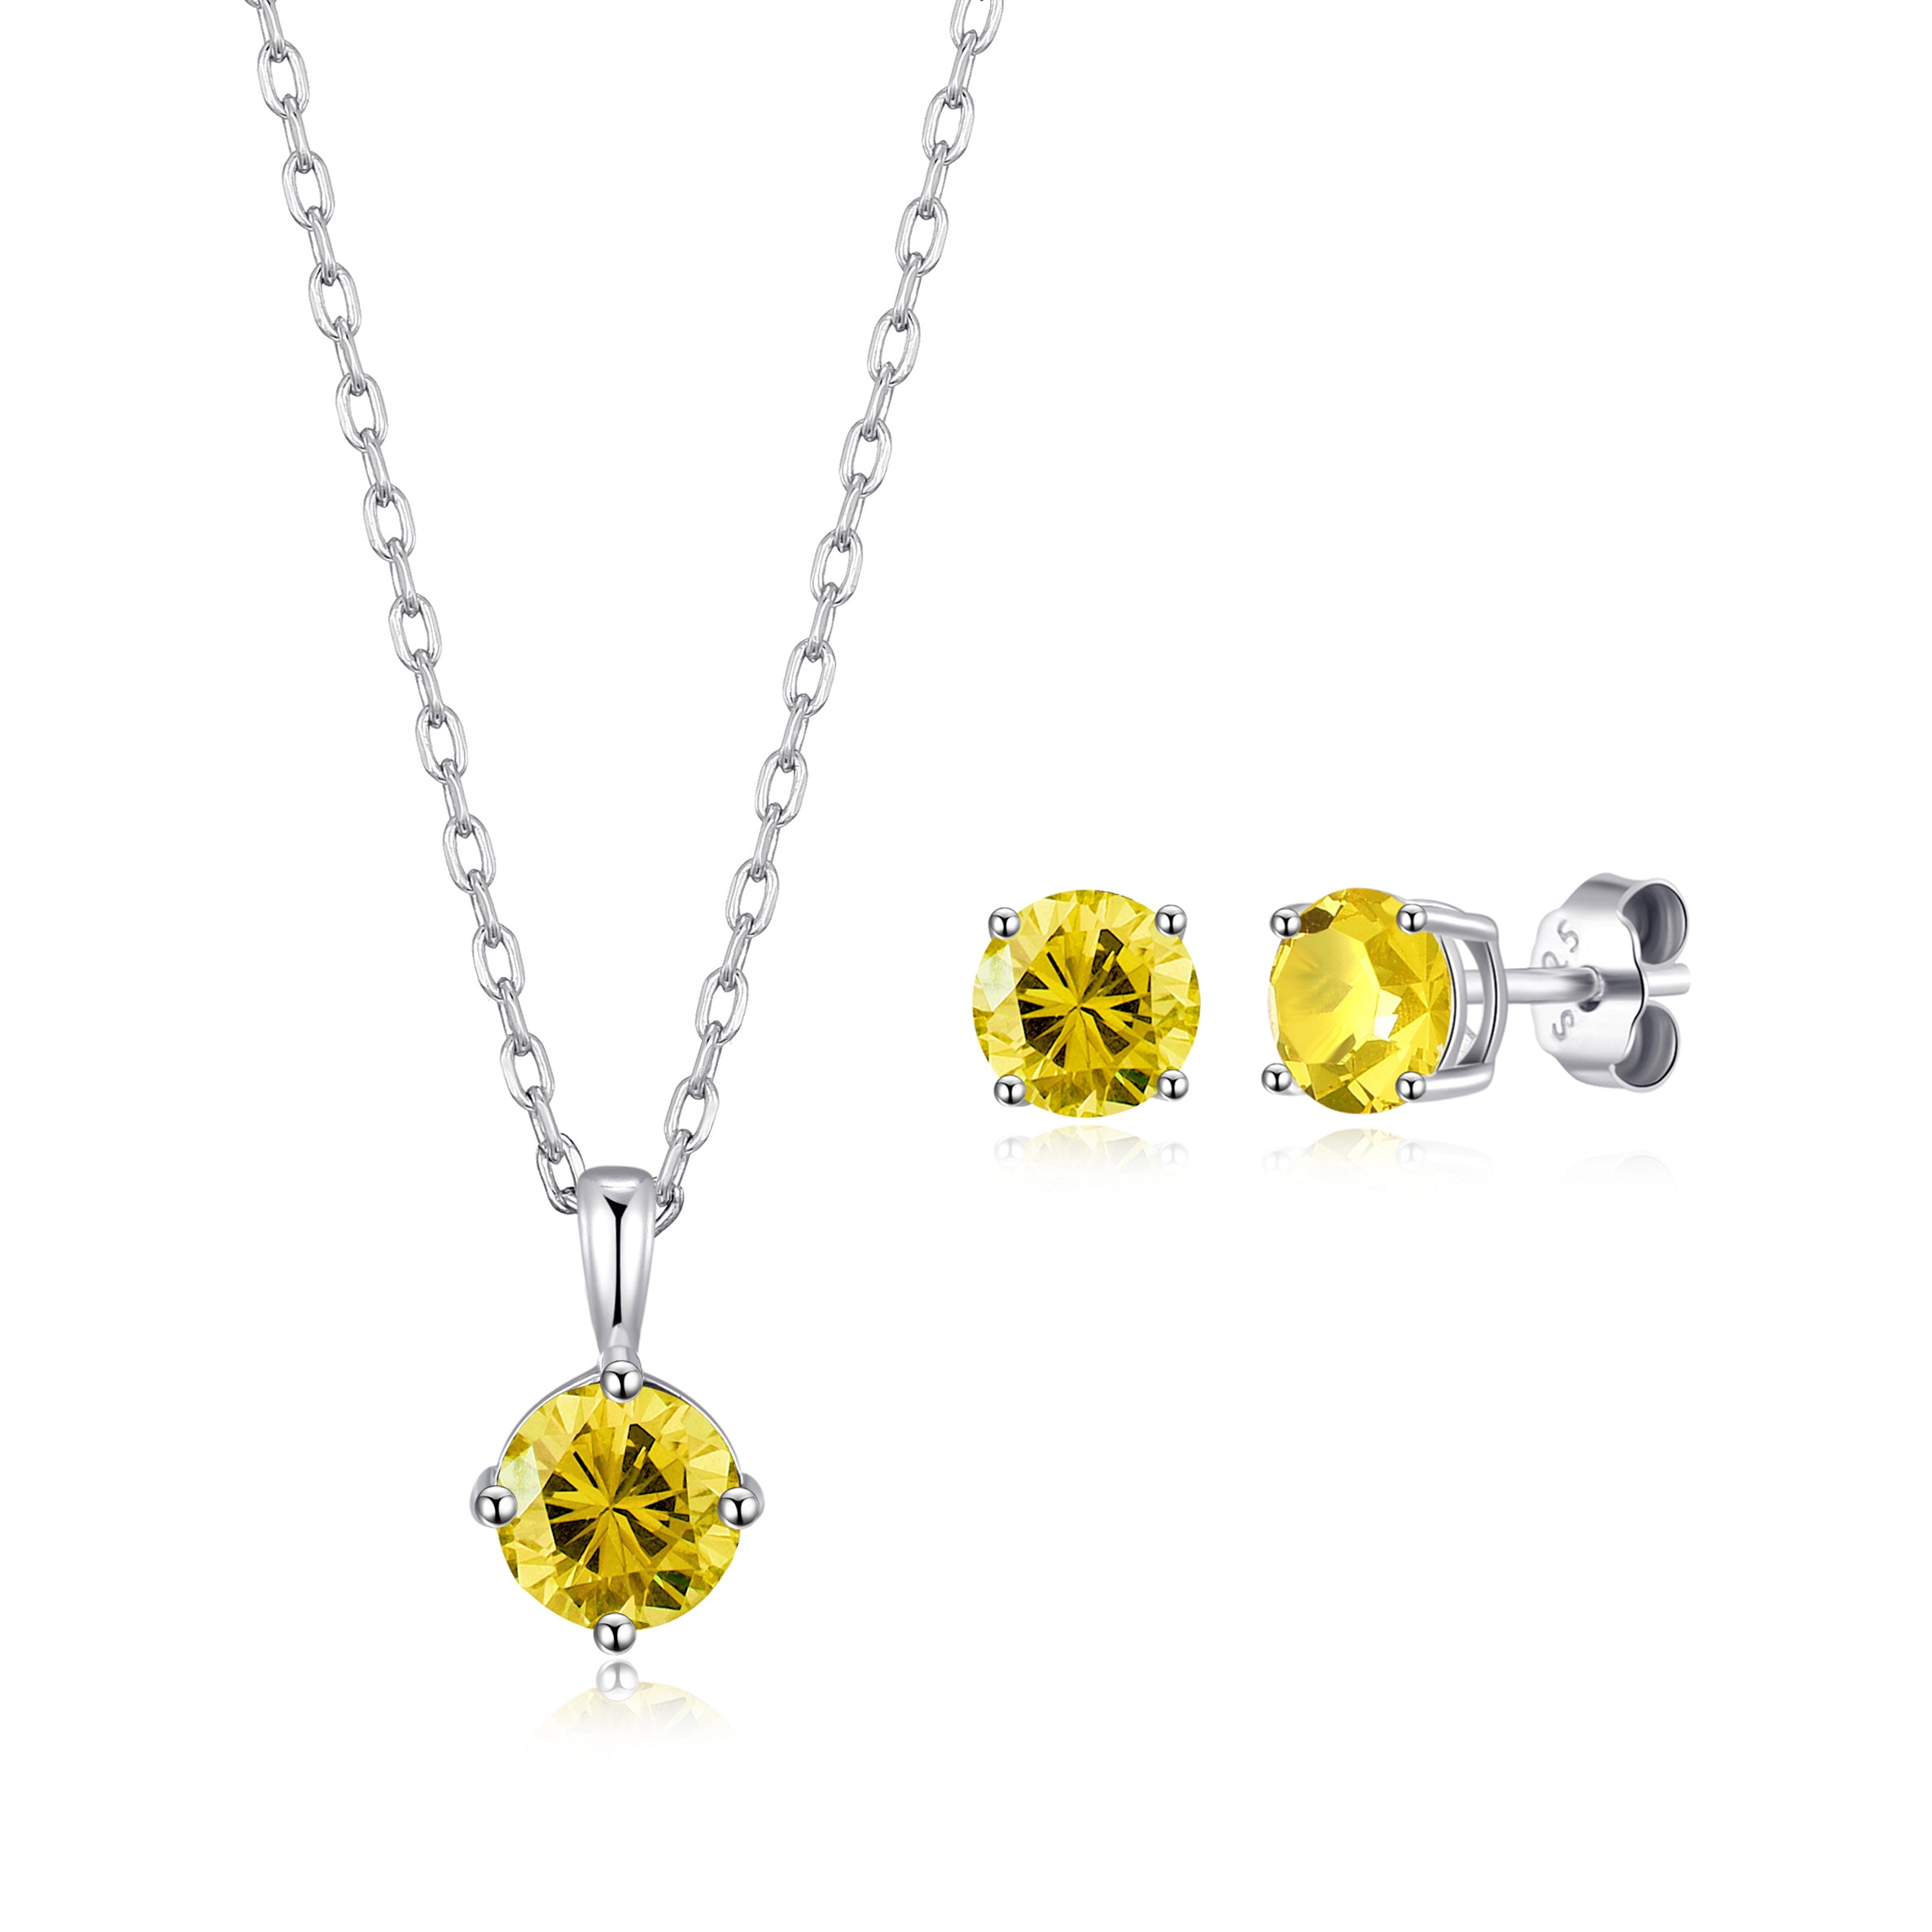 Sterling Silver November (Topaz) Birthstone Necklace & Earrings Set Created with Zircondia® Crystals by Philip Jones Jewellery